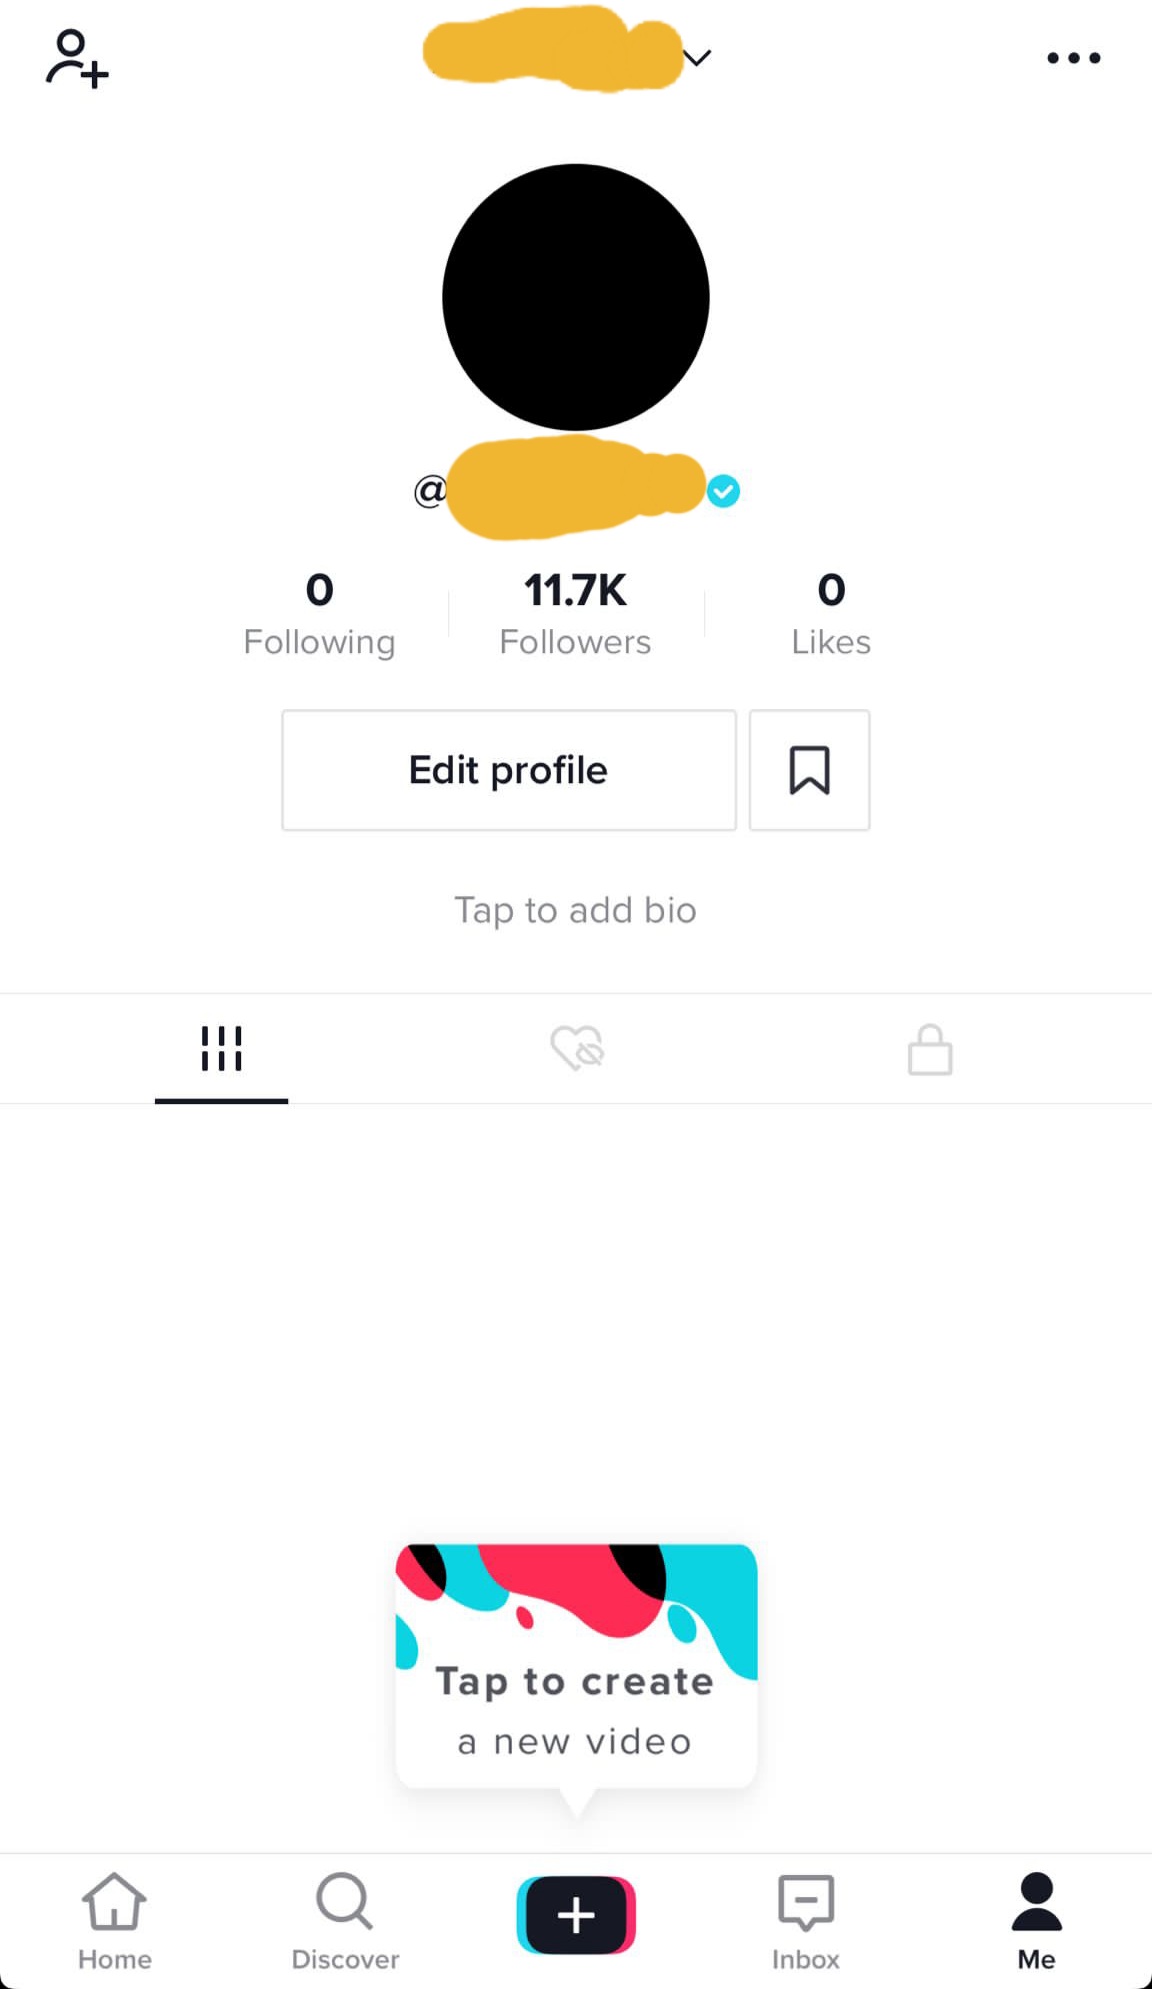 Other, Verified Tik Tok Account For Sale